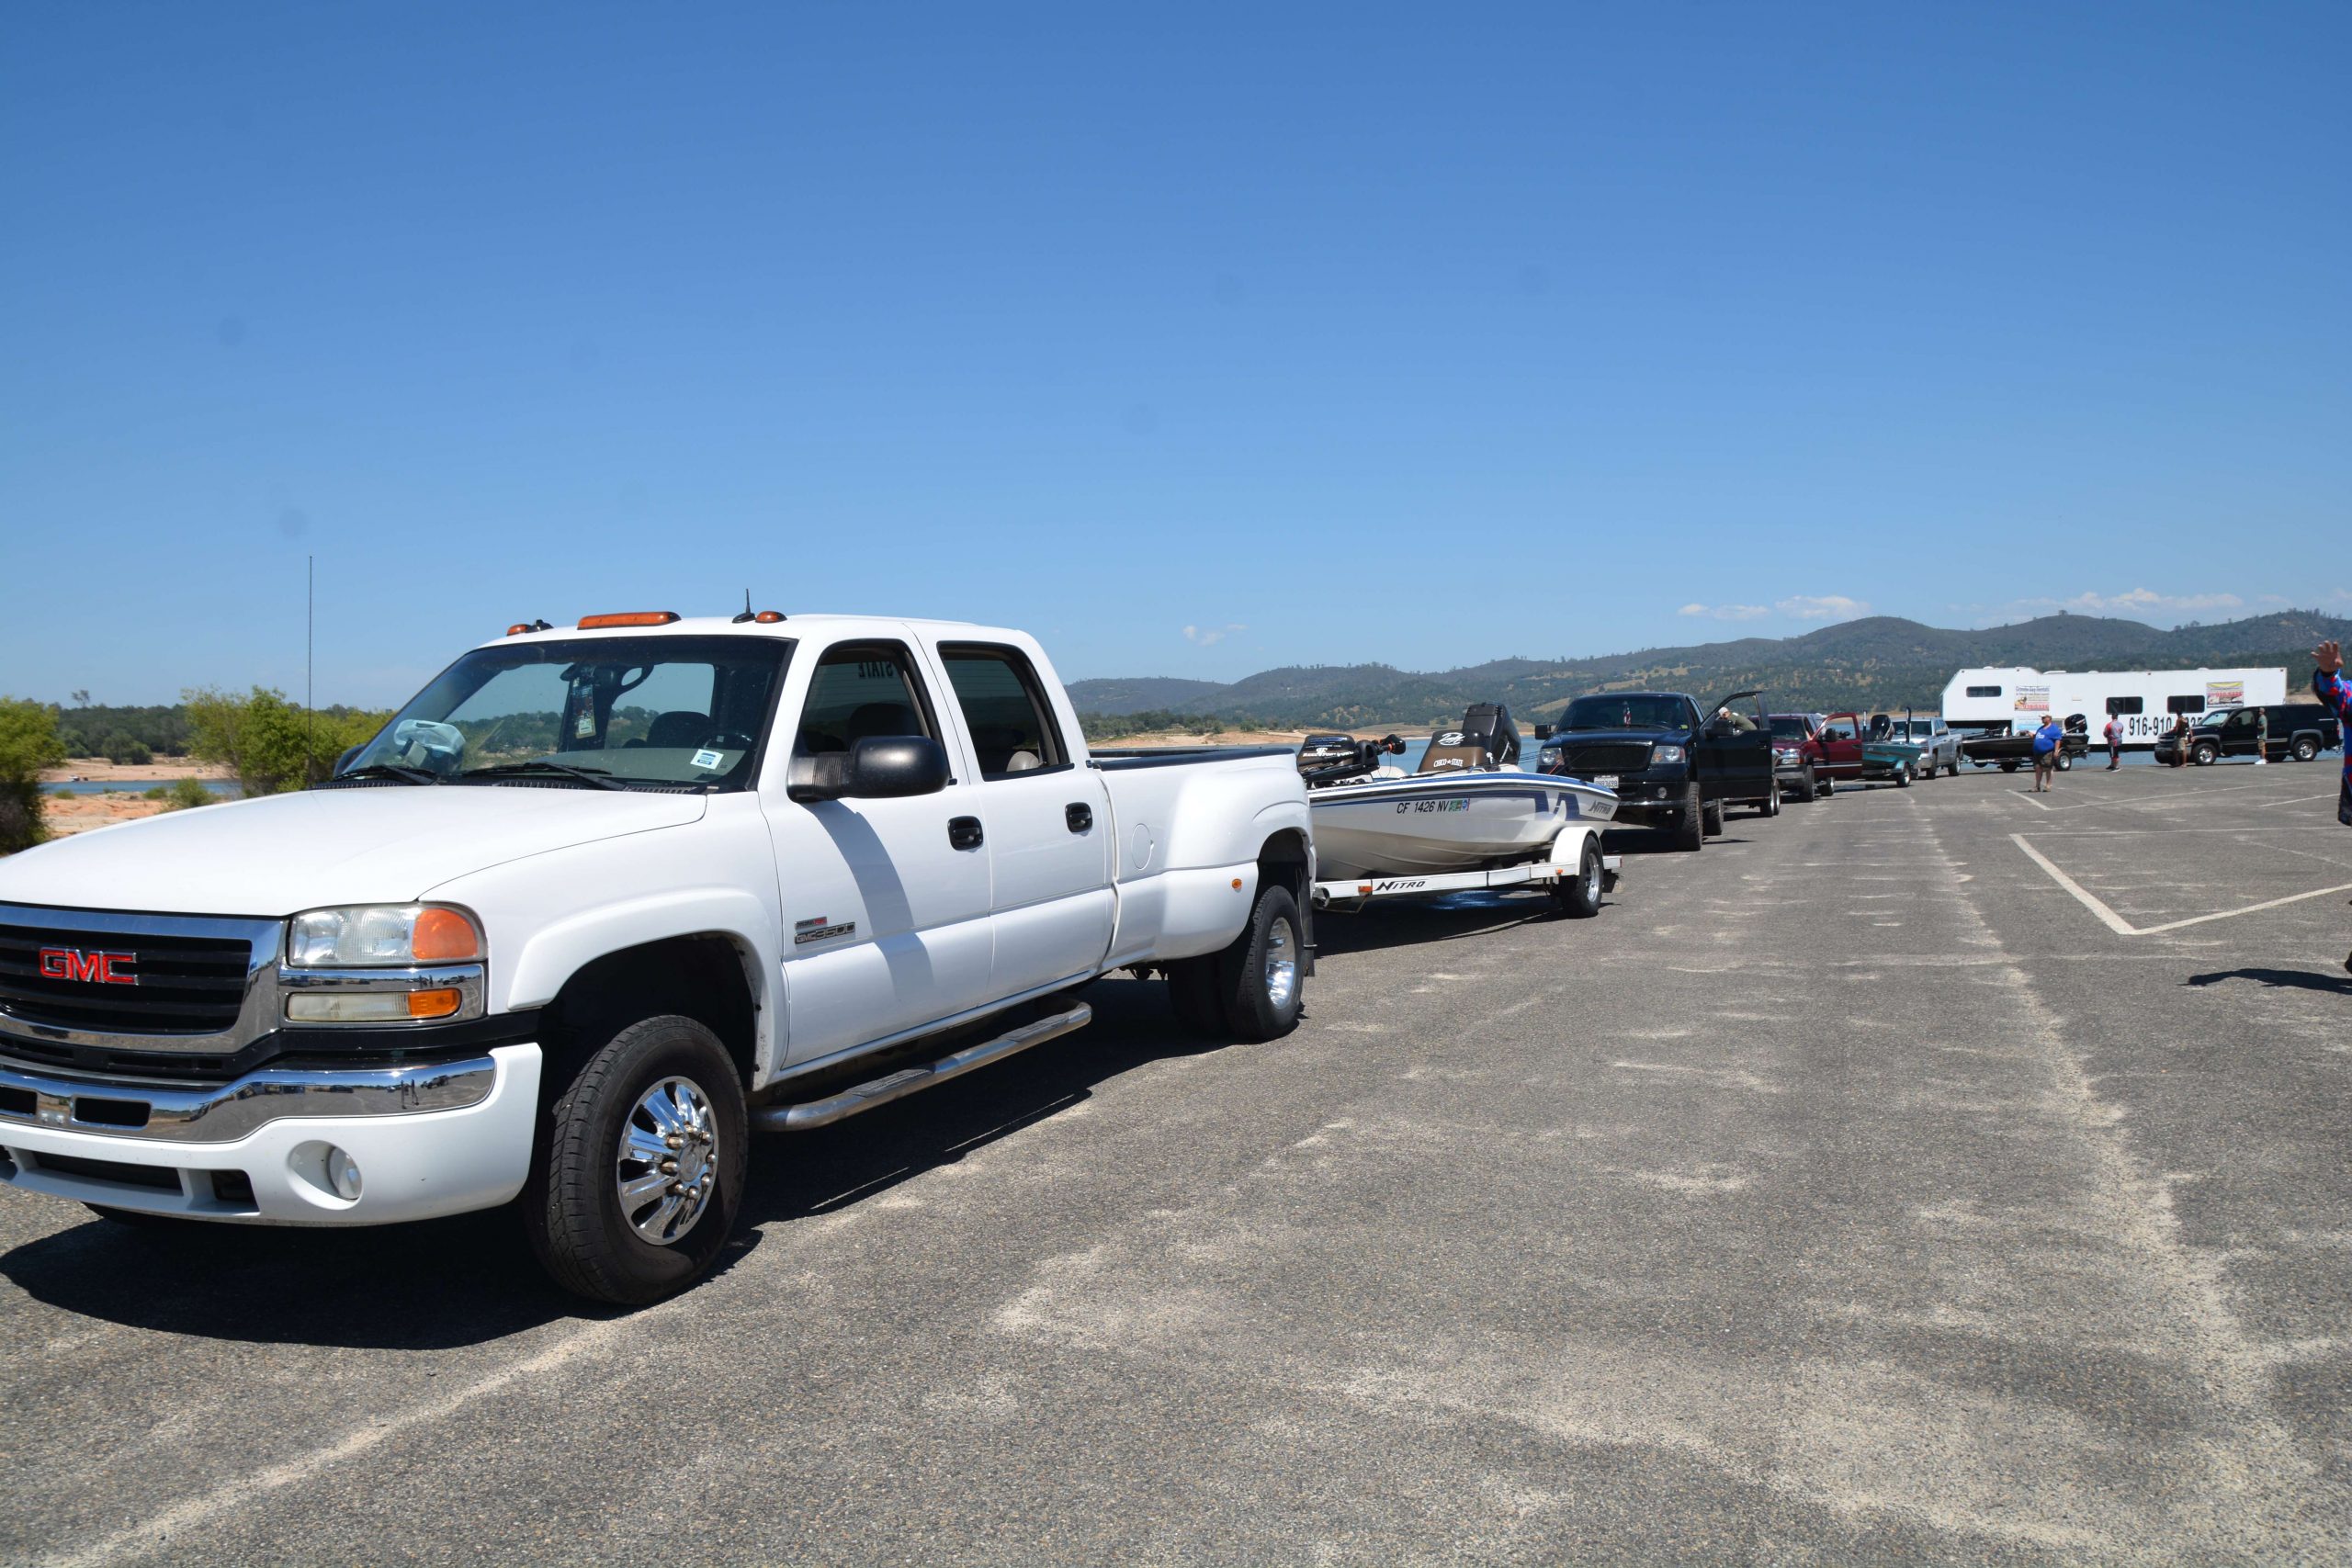 Competitors lined up for the drive-through weigh-in today at Folsom Reservoir at the 2015 Carhartt Bassmaster College Series Western Regional presented by Bass Pro Shops.